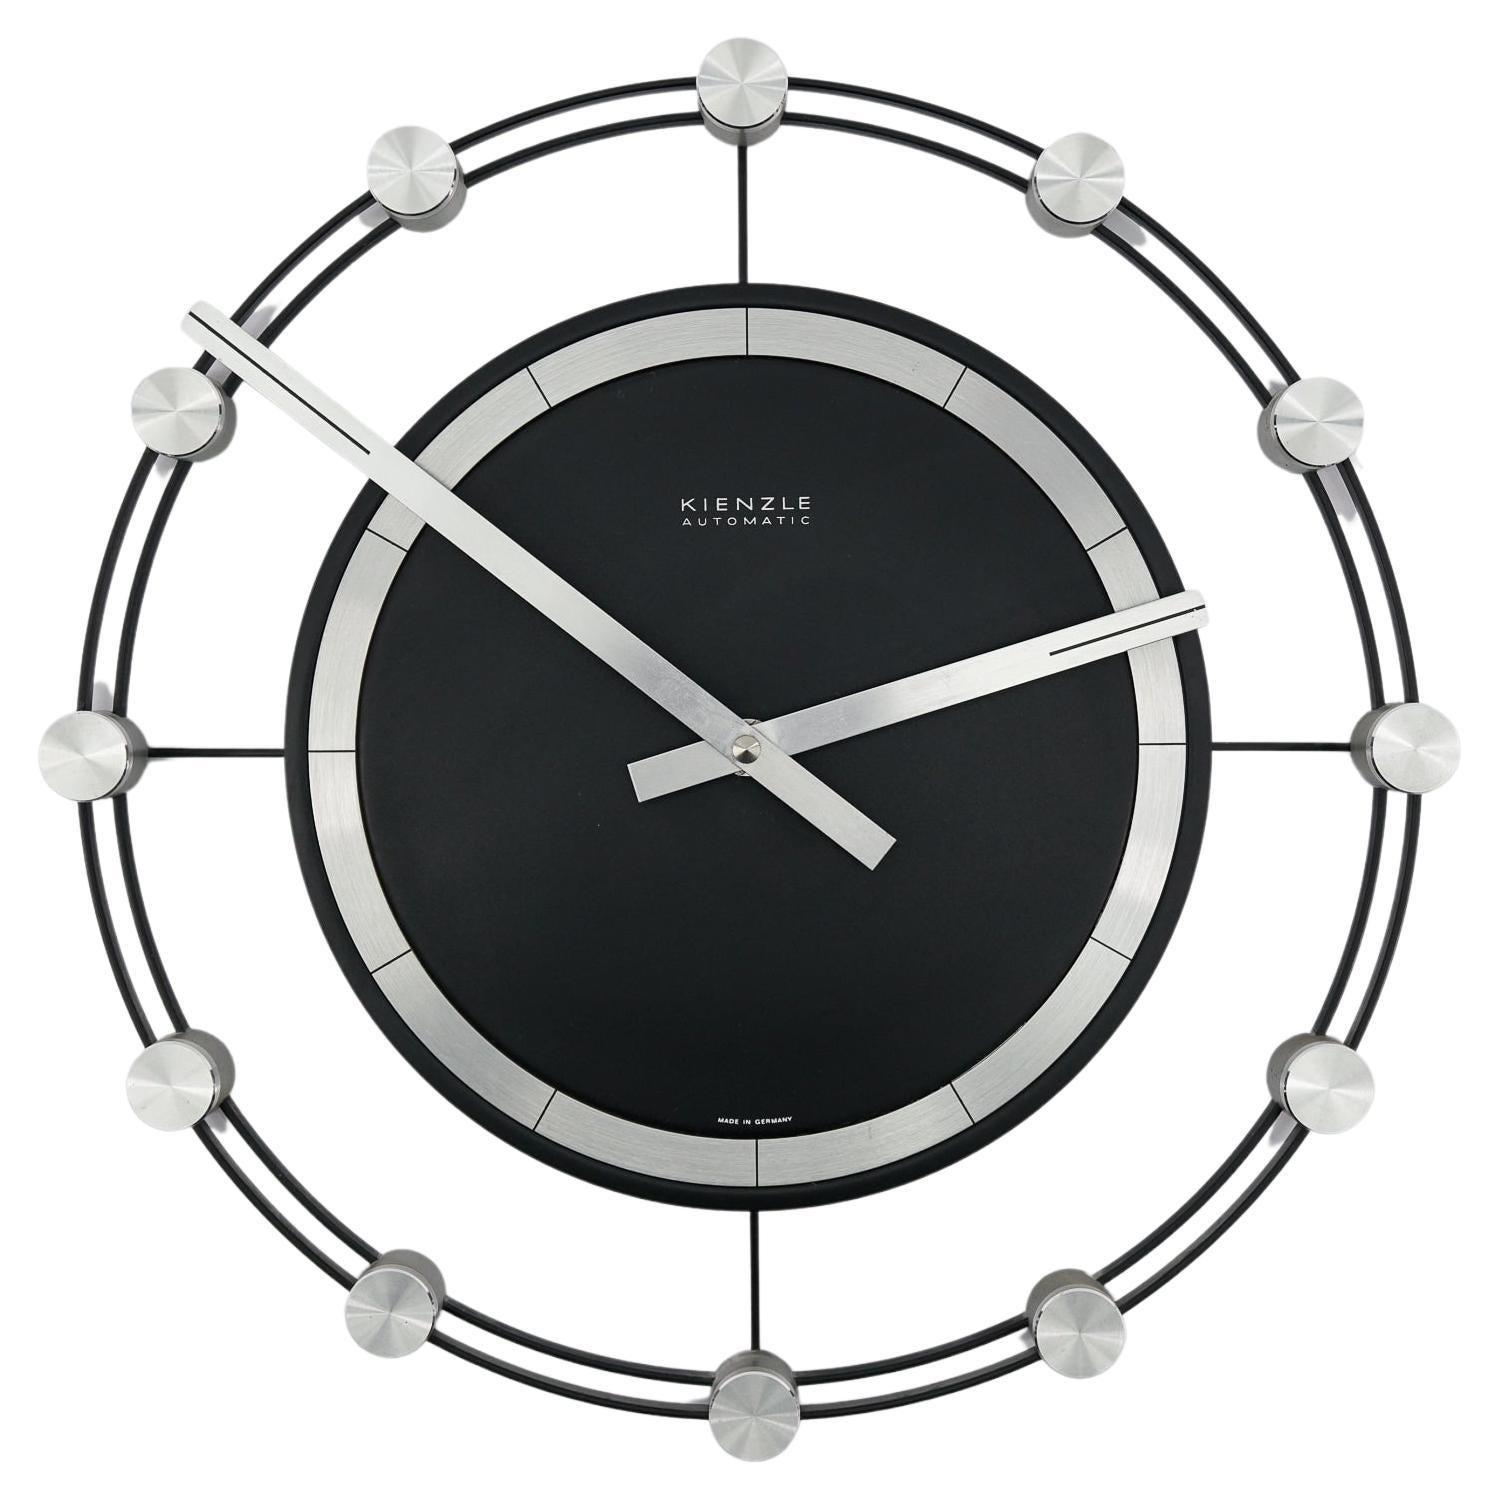 Space Age Sunburst Wall Clock by Kienzle Automatic in Aluminium, 1960s Germany For Sale